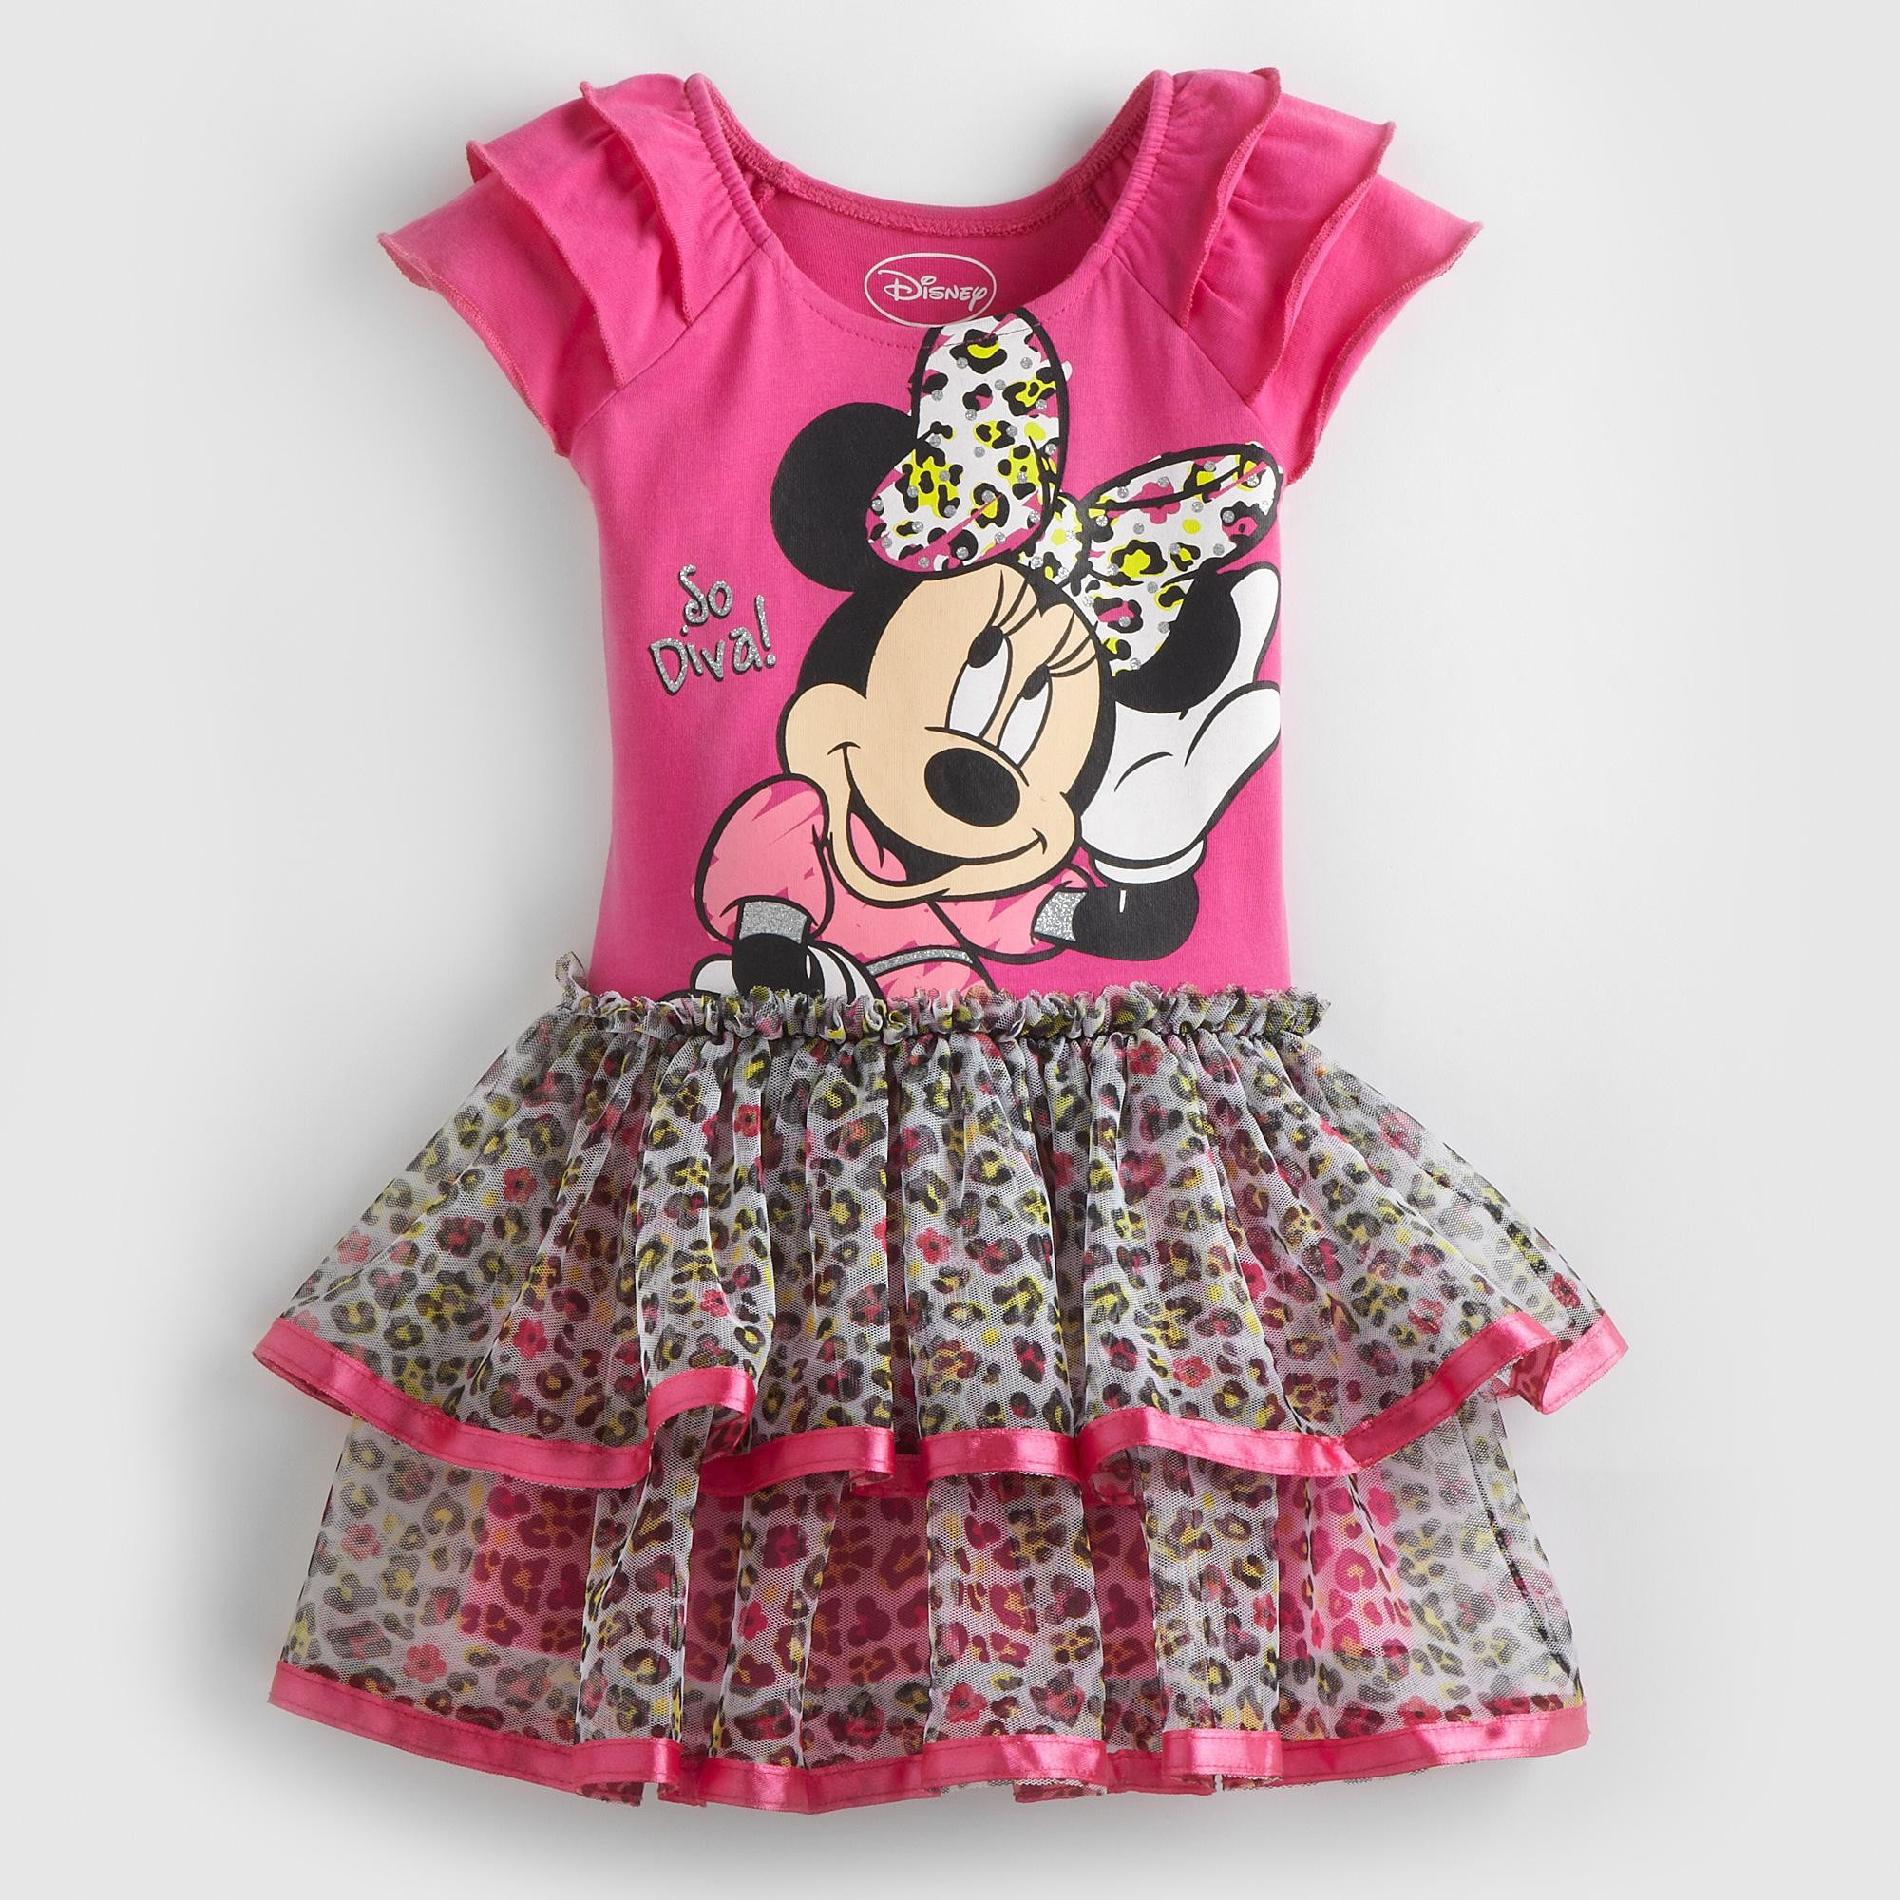 Disney Minnie Mouse Infant & Toddler Girl's TShirt Dress